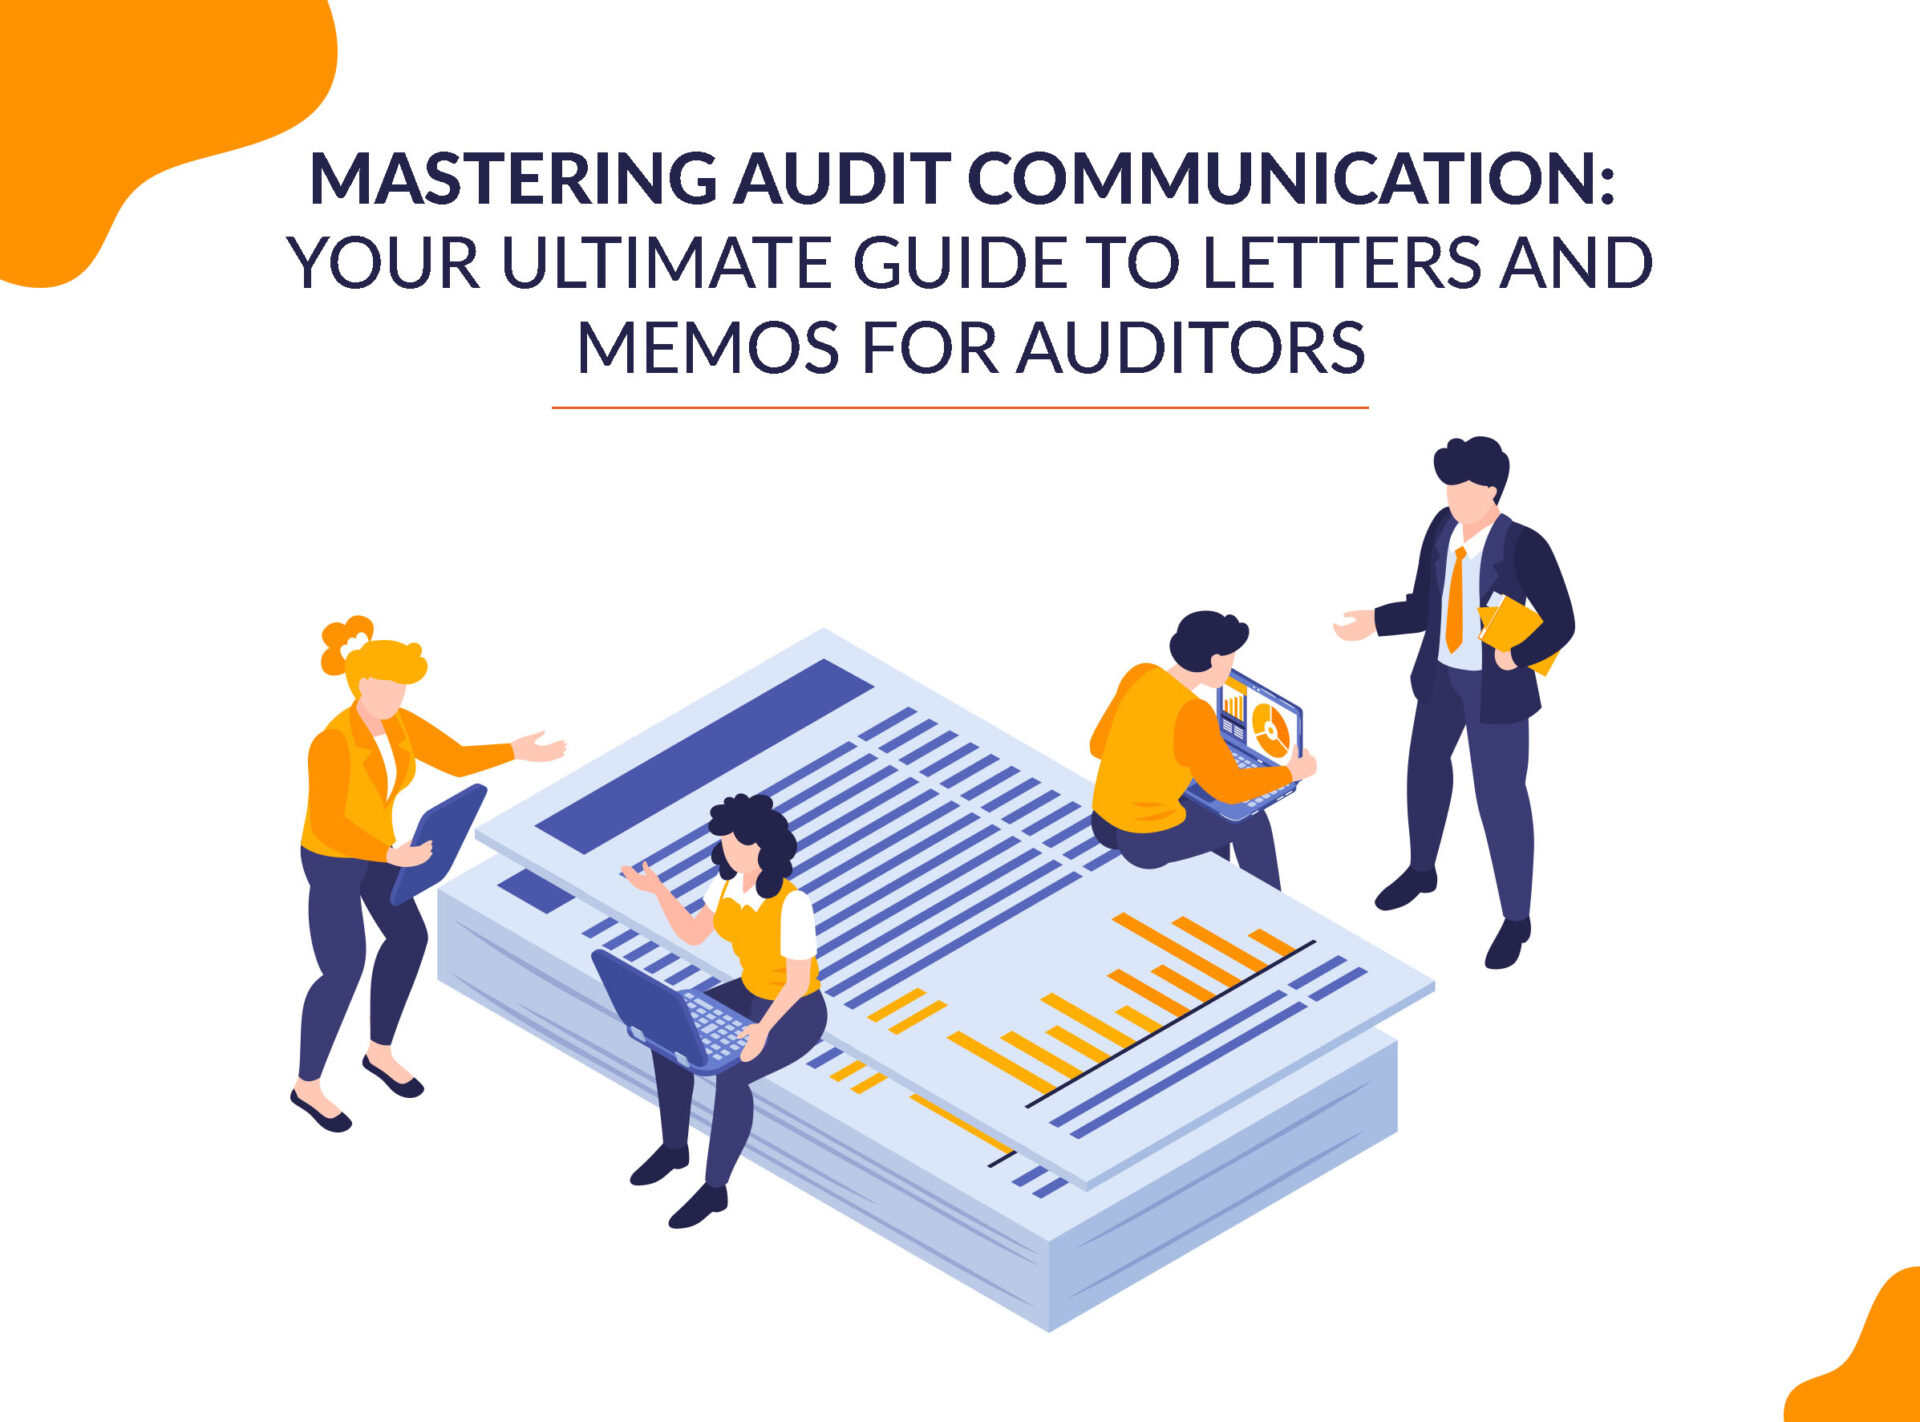 Mastering Audit Communication: Your Ultimate Guide to Letters and Memos for Auditors